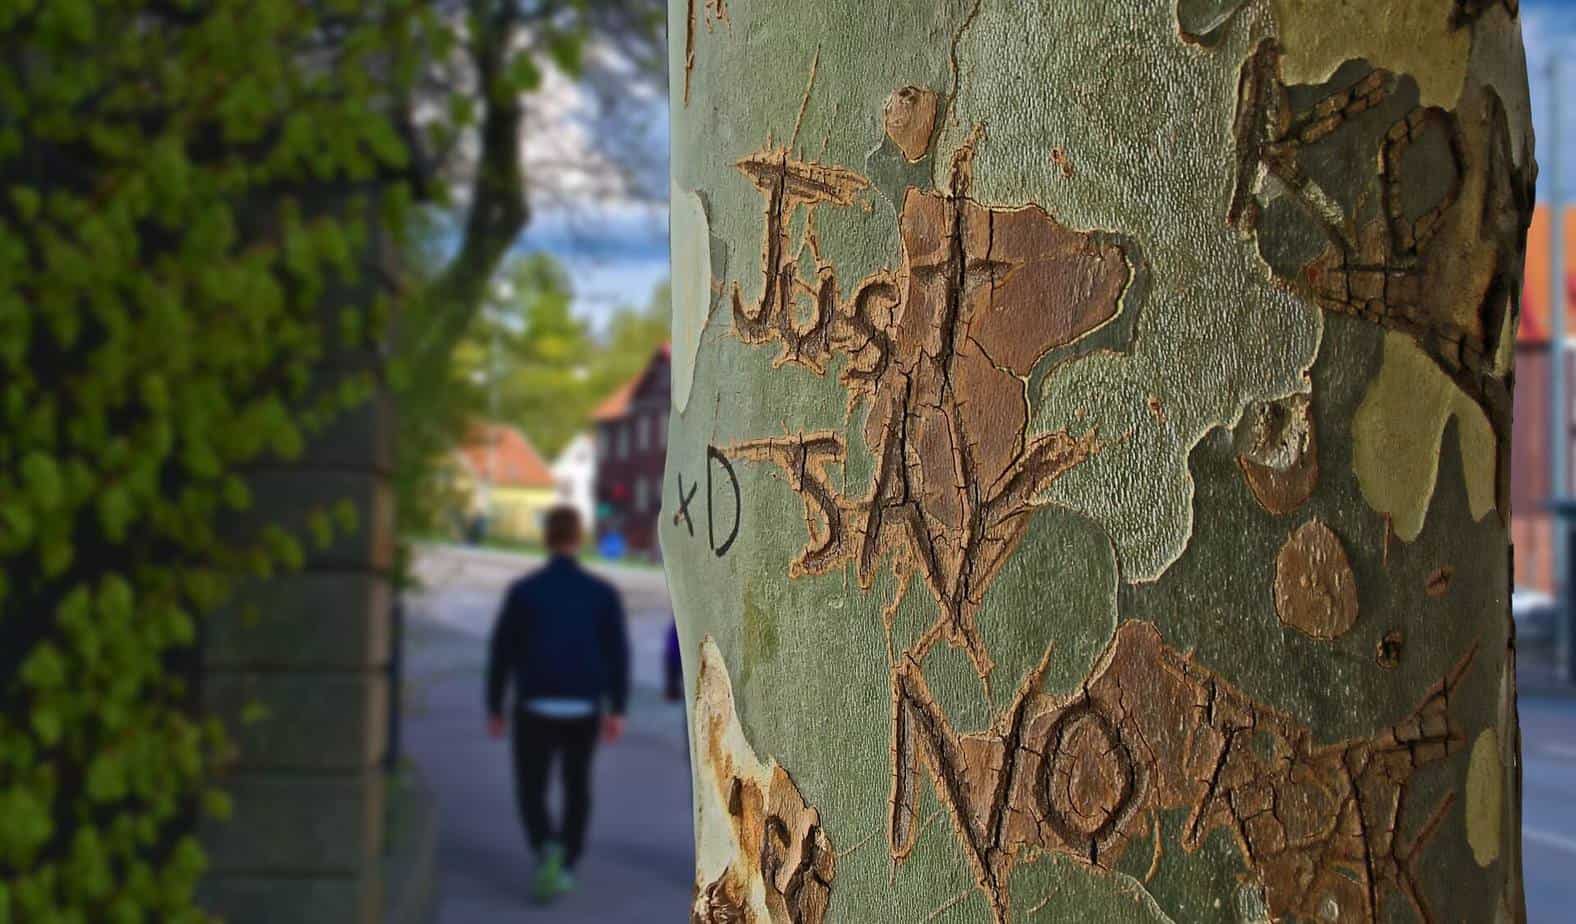 Just say no written on tree trunk